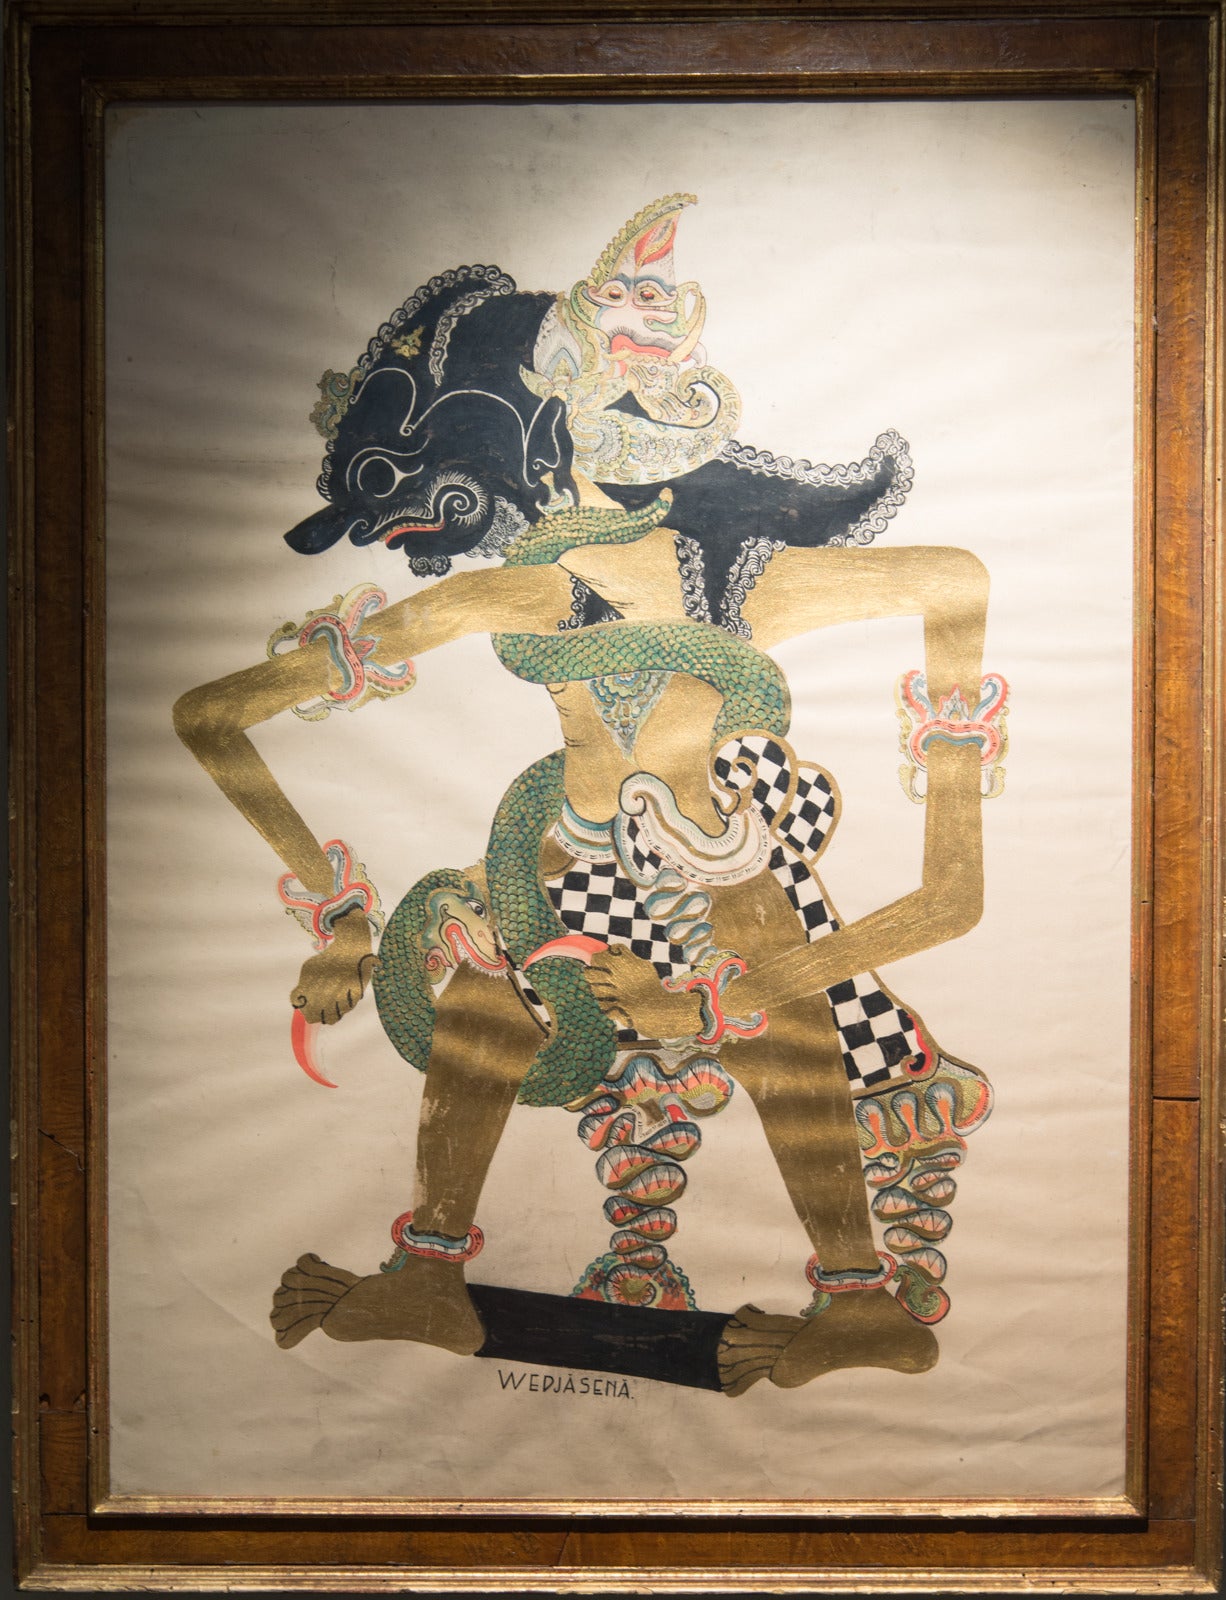 Early 20th century Indonesian painting on paper depicting Waylang Kulit also known as a shadow puppet.

This folk painting on paper is under glass with a lovely aged burled wood frame. The painting is likely early 20th century and the frame is